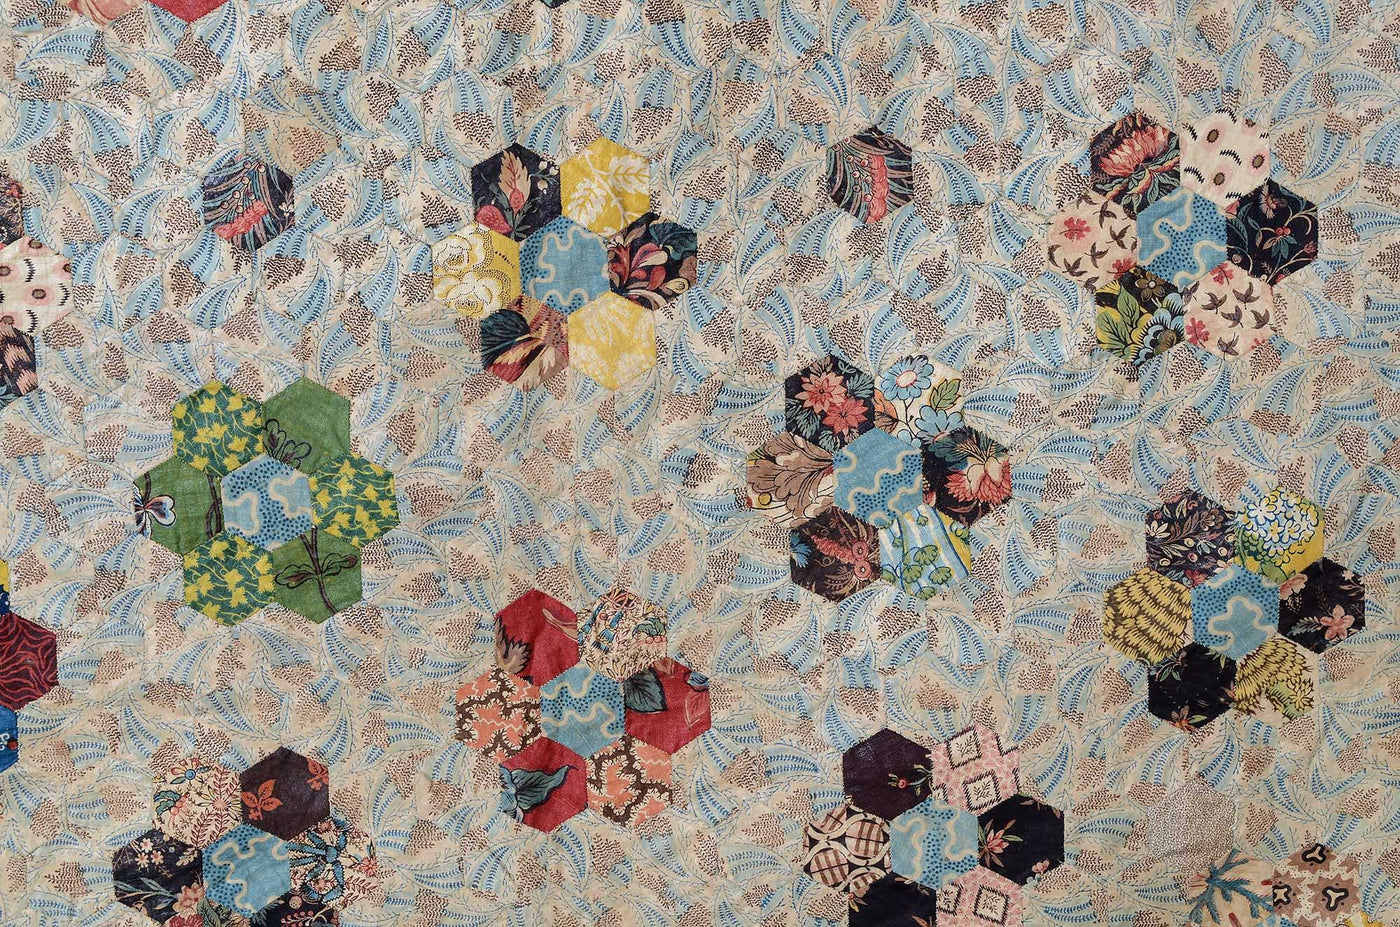 Close-up detailed hexagons patterned patches from antique quilt "Early Mosaic Hexagons Quilt with Center Star: Circa 1820's".